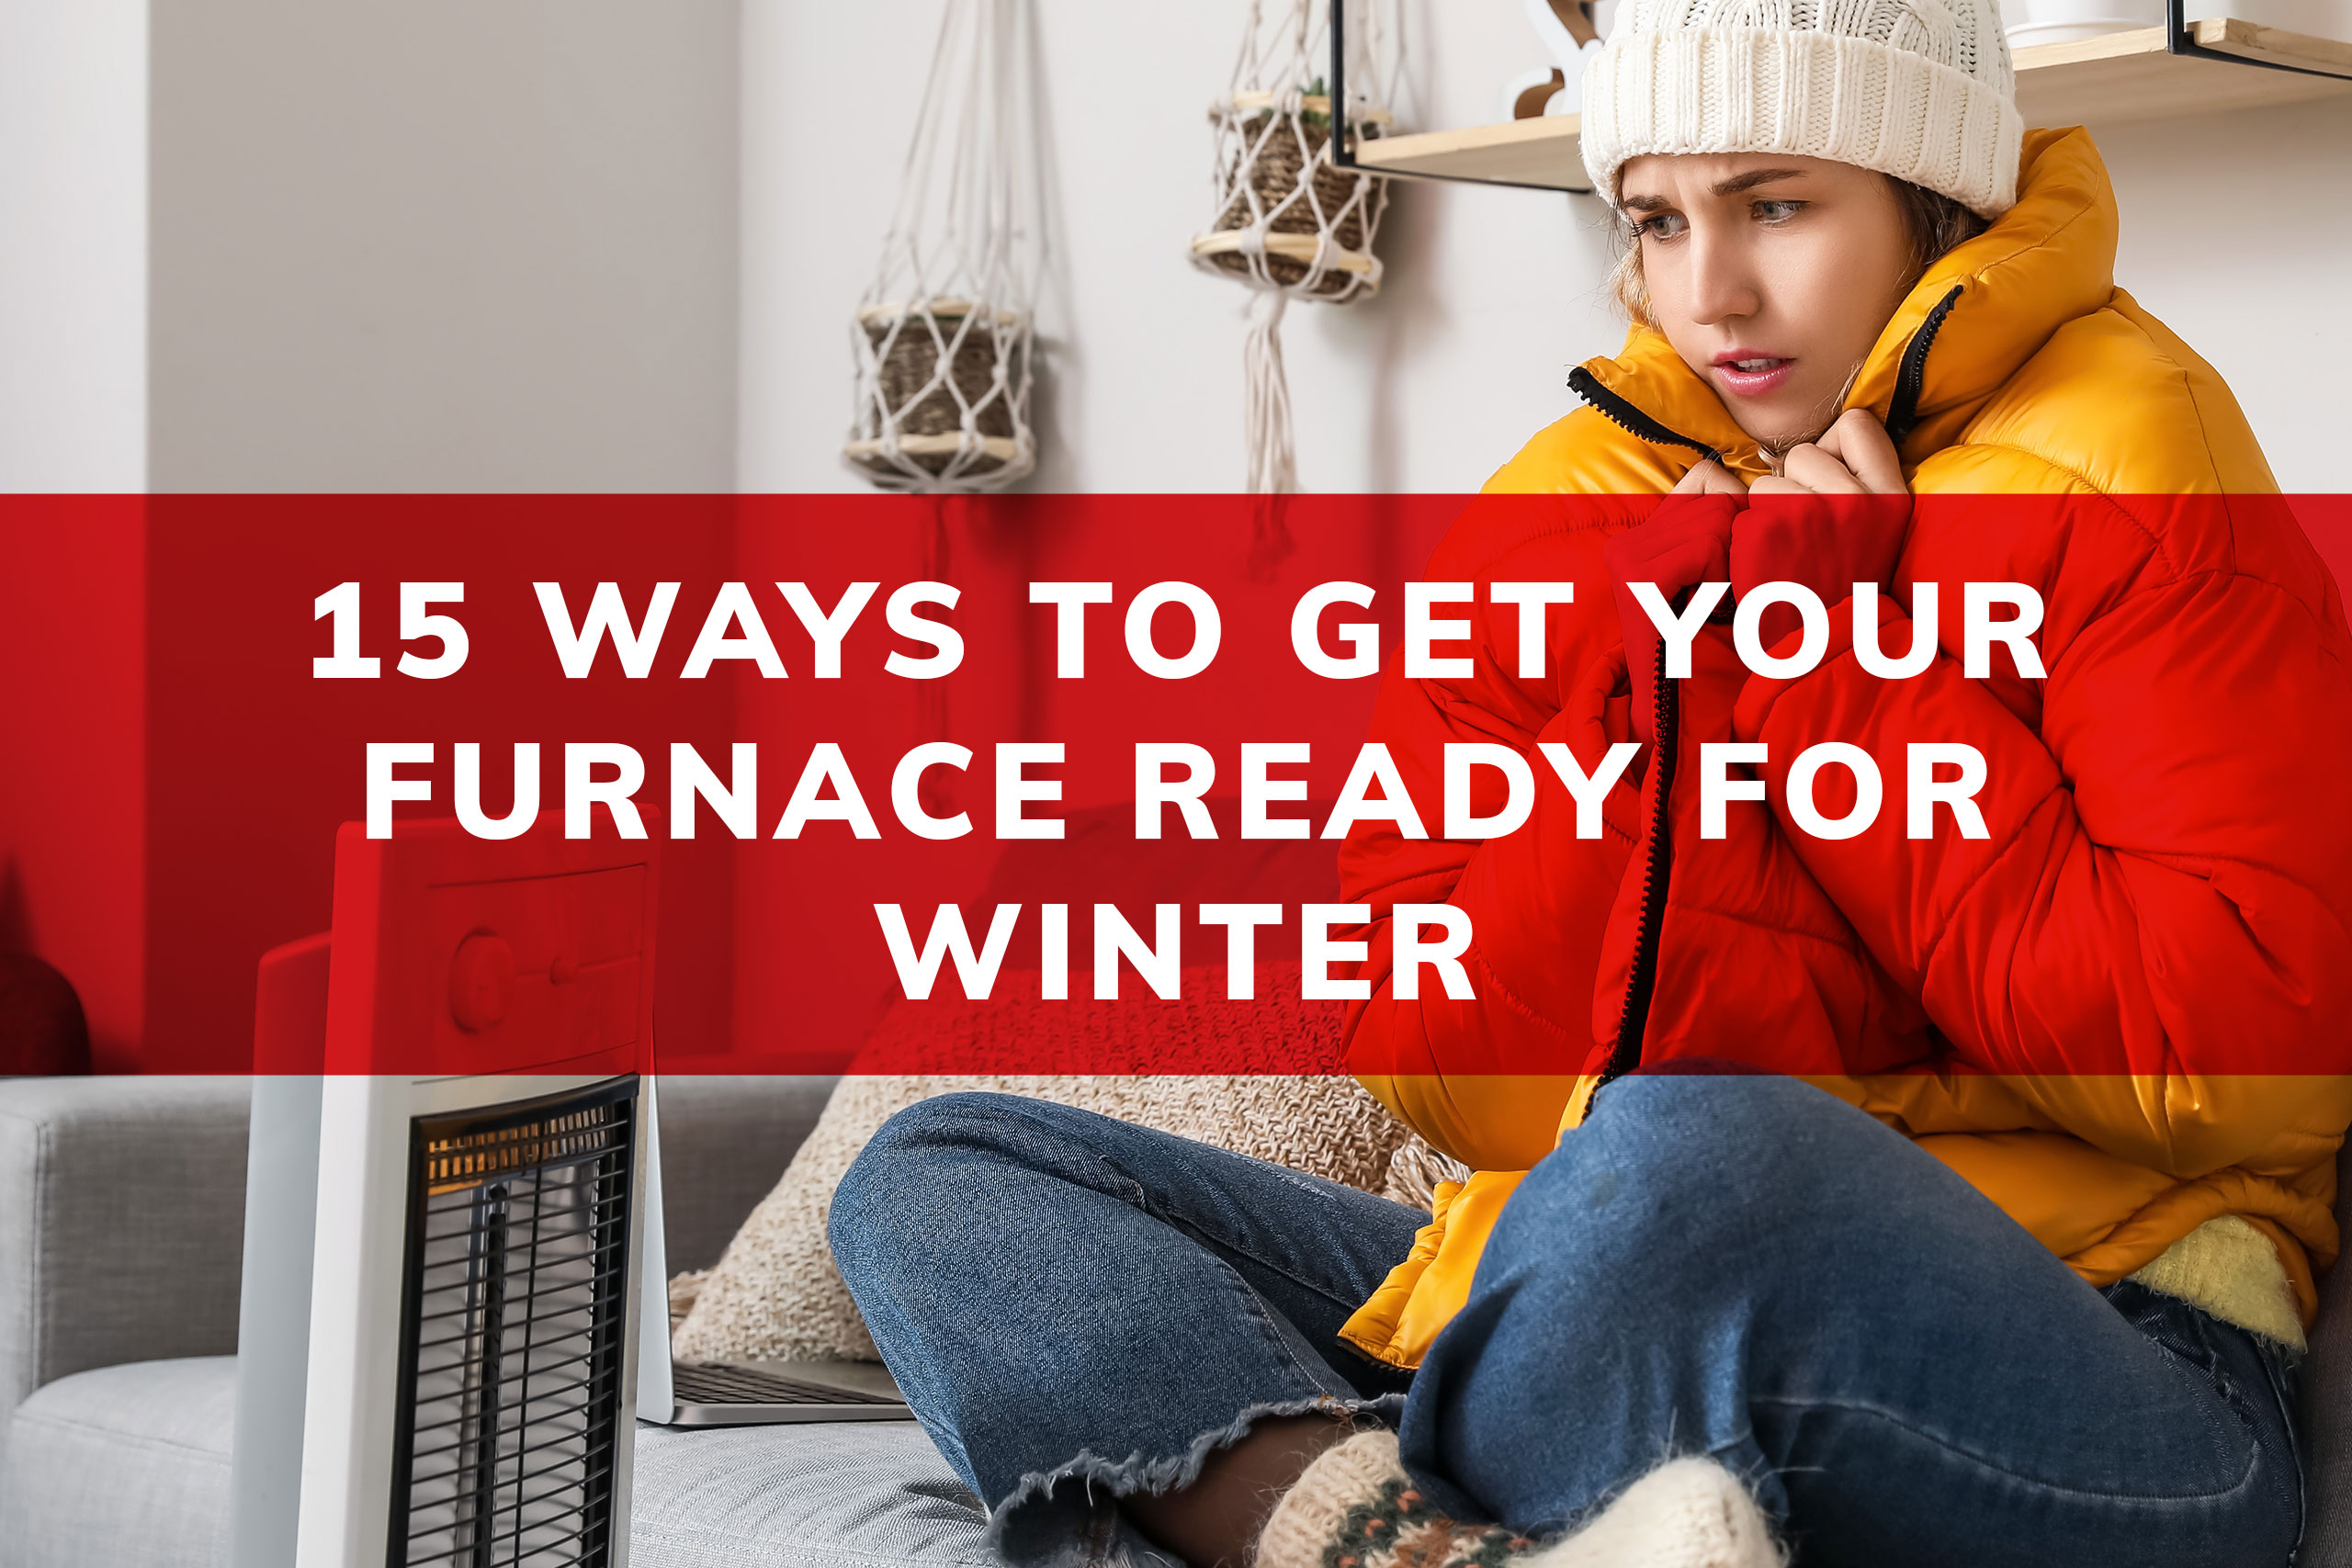 Tips for Getting Your Furnace Ready for Winter